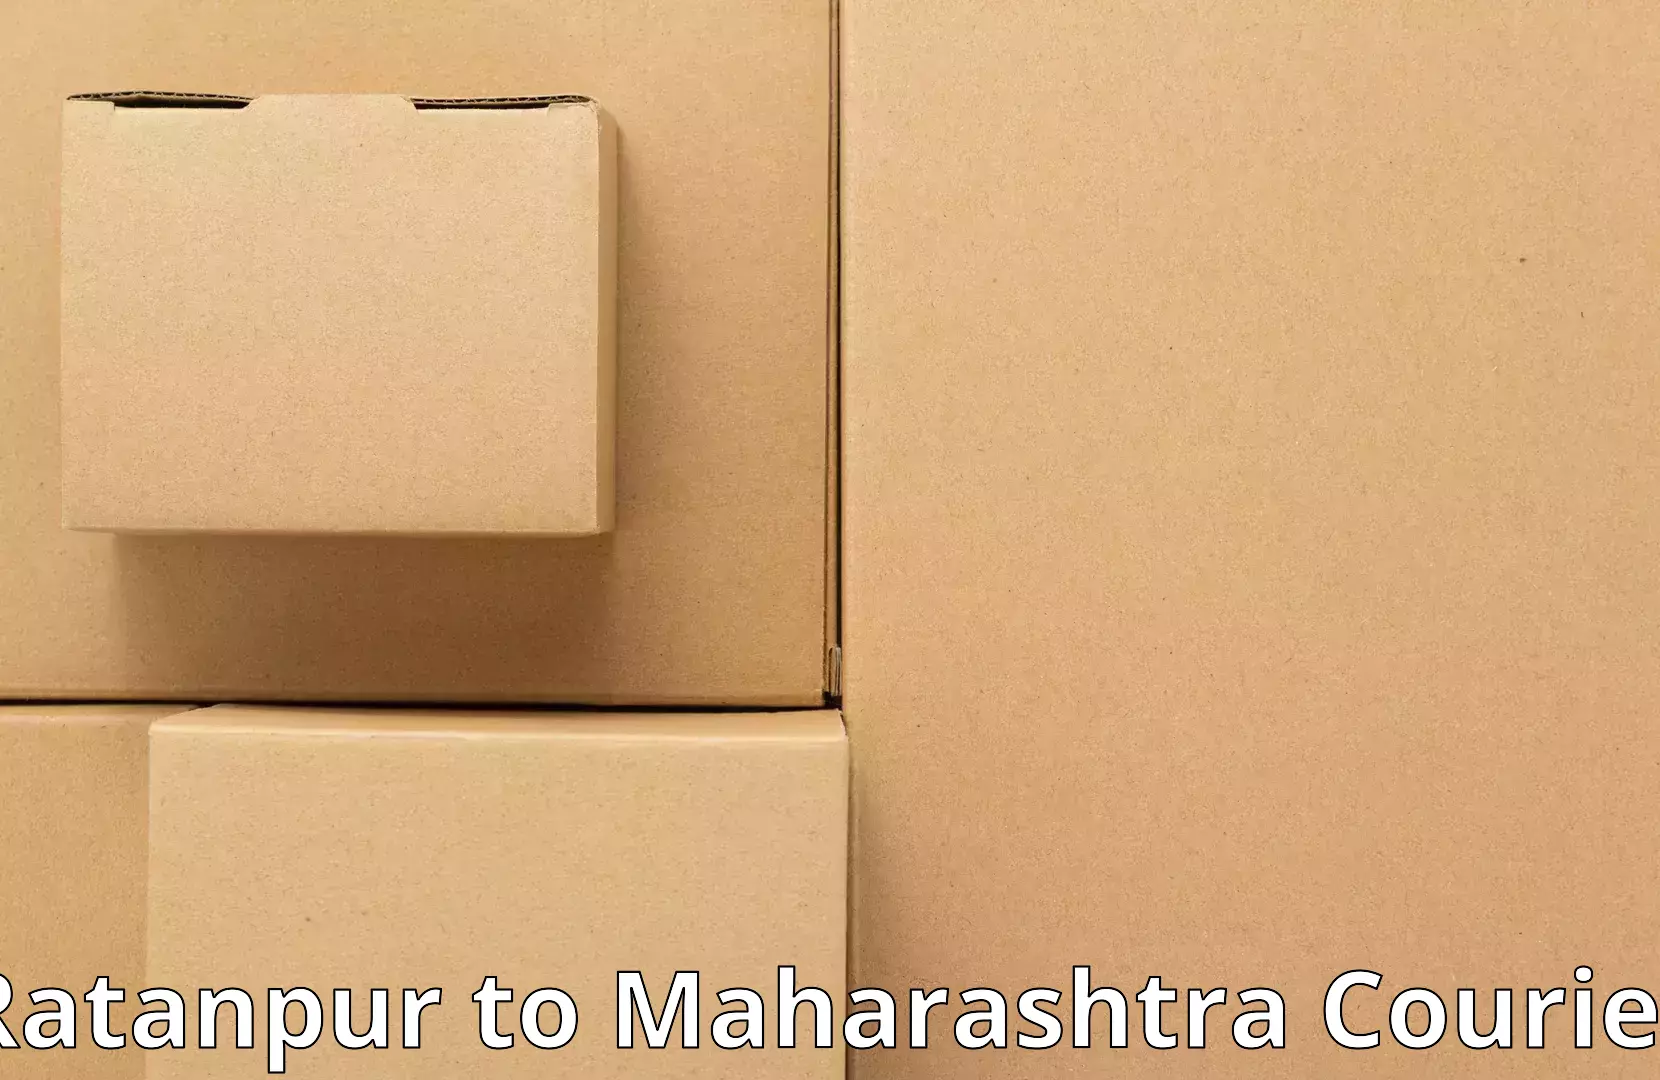 Professional moving company Ratanpur to Shevgaon